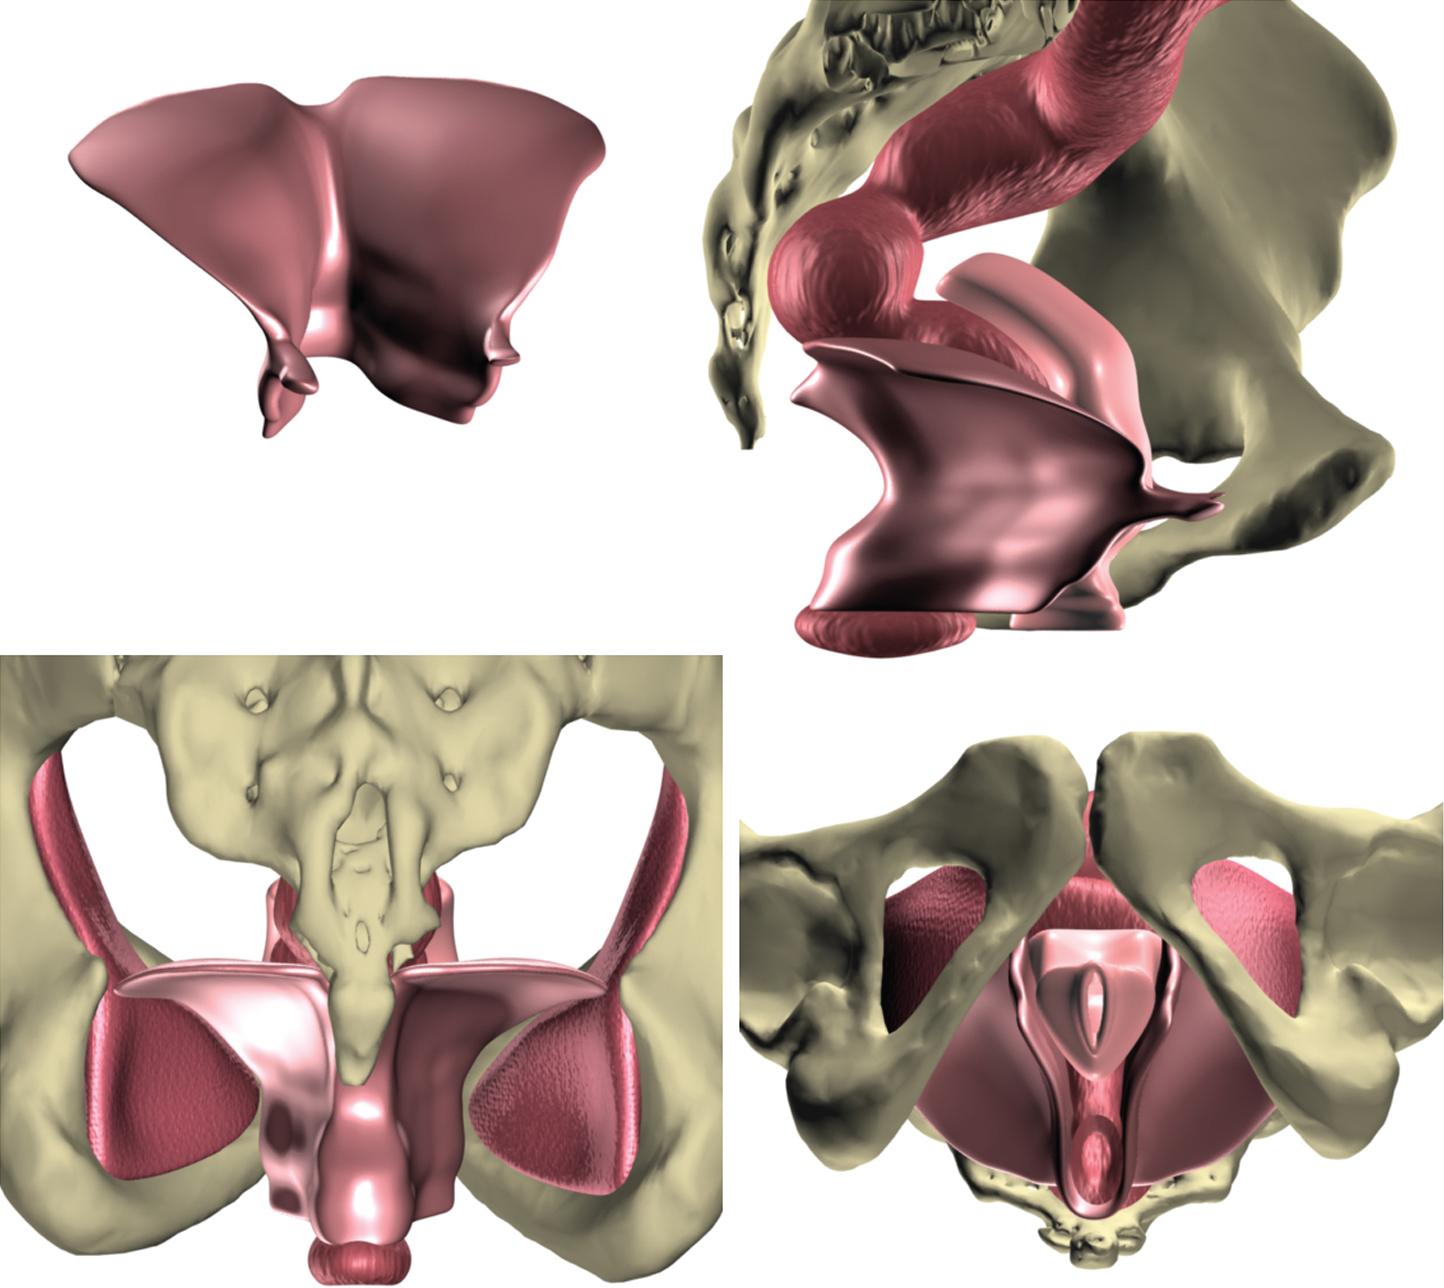 Fig. 1.3, Digitally enhanced three-dimensional reconstructions of the female pelvic floor from a magnetic resonance image of the pelvis in a healthy, nulliparous 23-year-old woman. Upper left: anterior view of the levator ani muscle with normal resting tone. Upper right: sagittal view of the levator ani muscle, bony pelvis, vagina, and rectum. Lower left: posterior view of the levator ani muscle, obturator internus muscles, and bony pelvis. Lower right: lithotomy view.